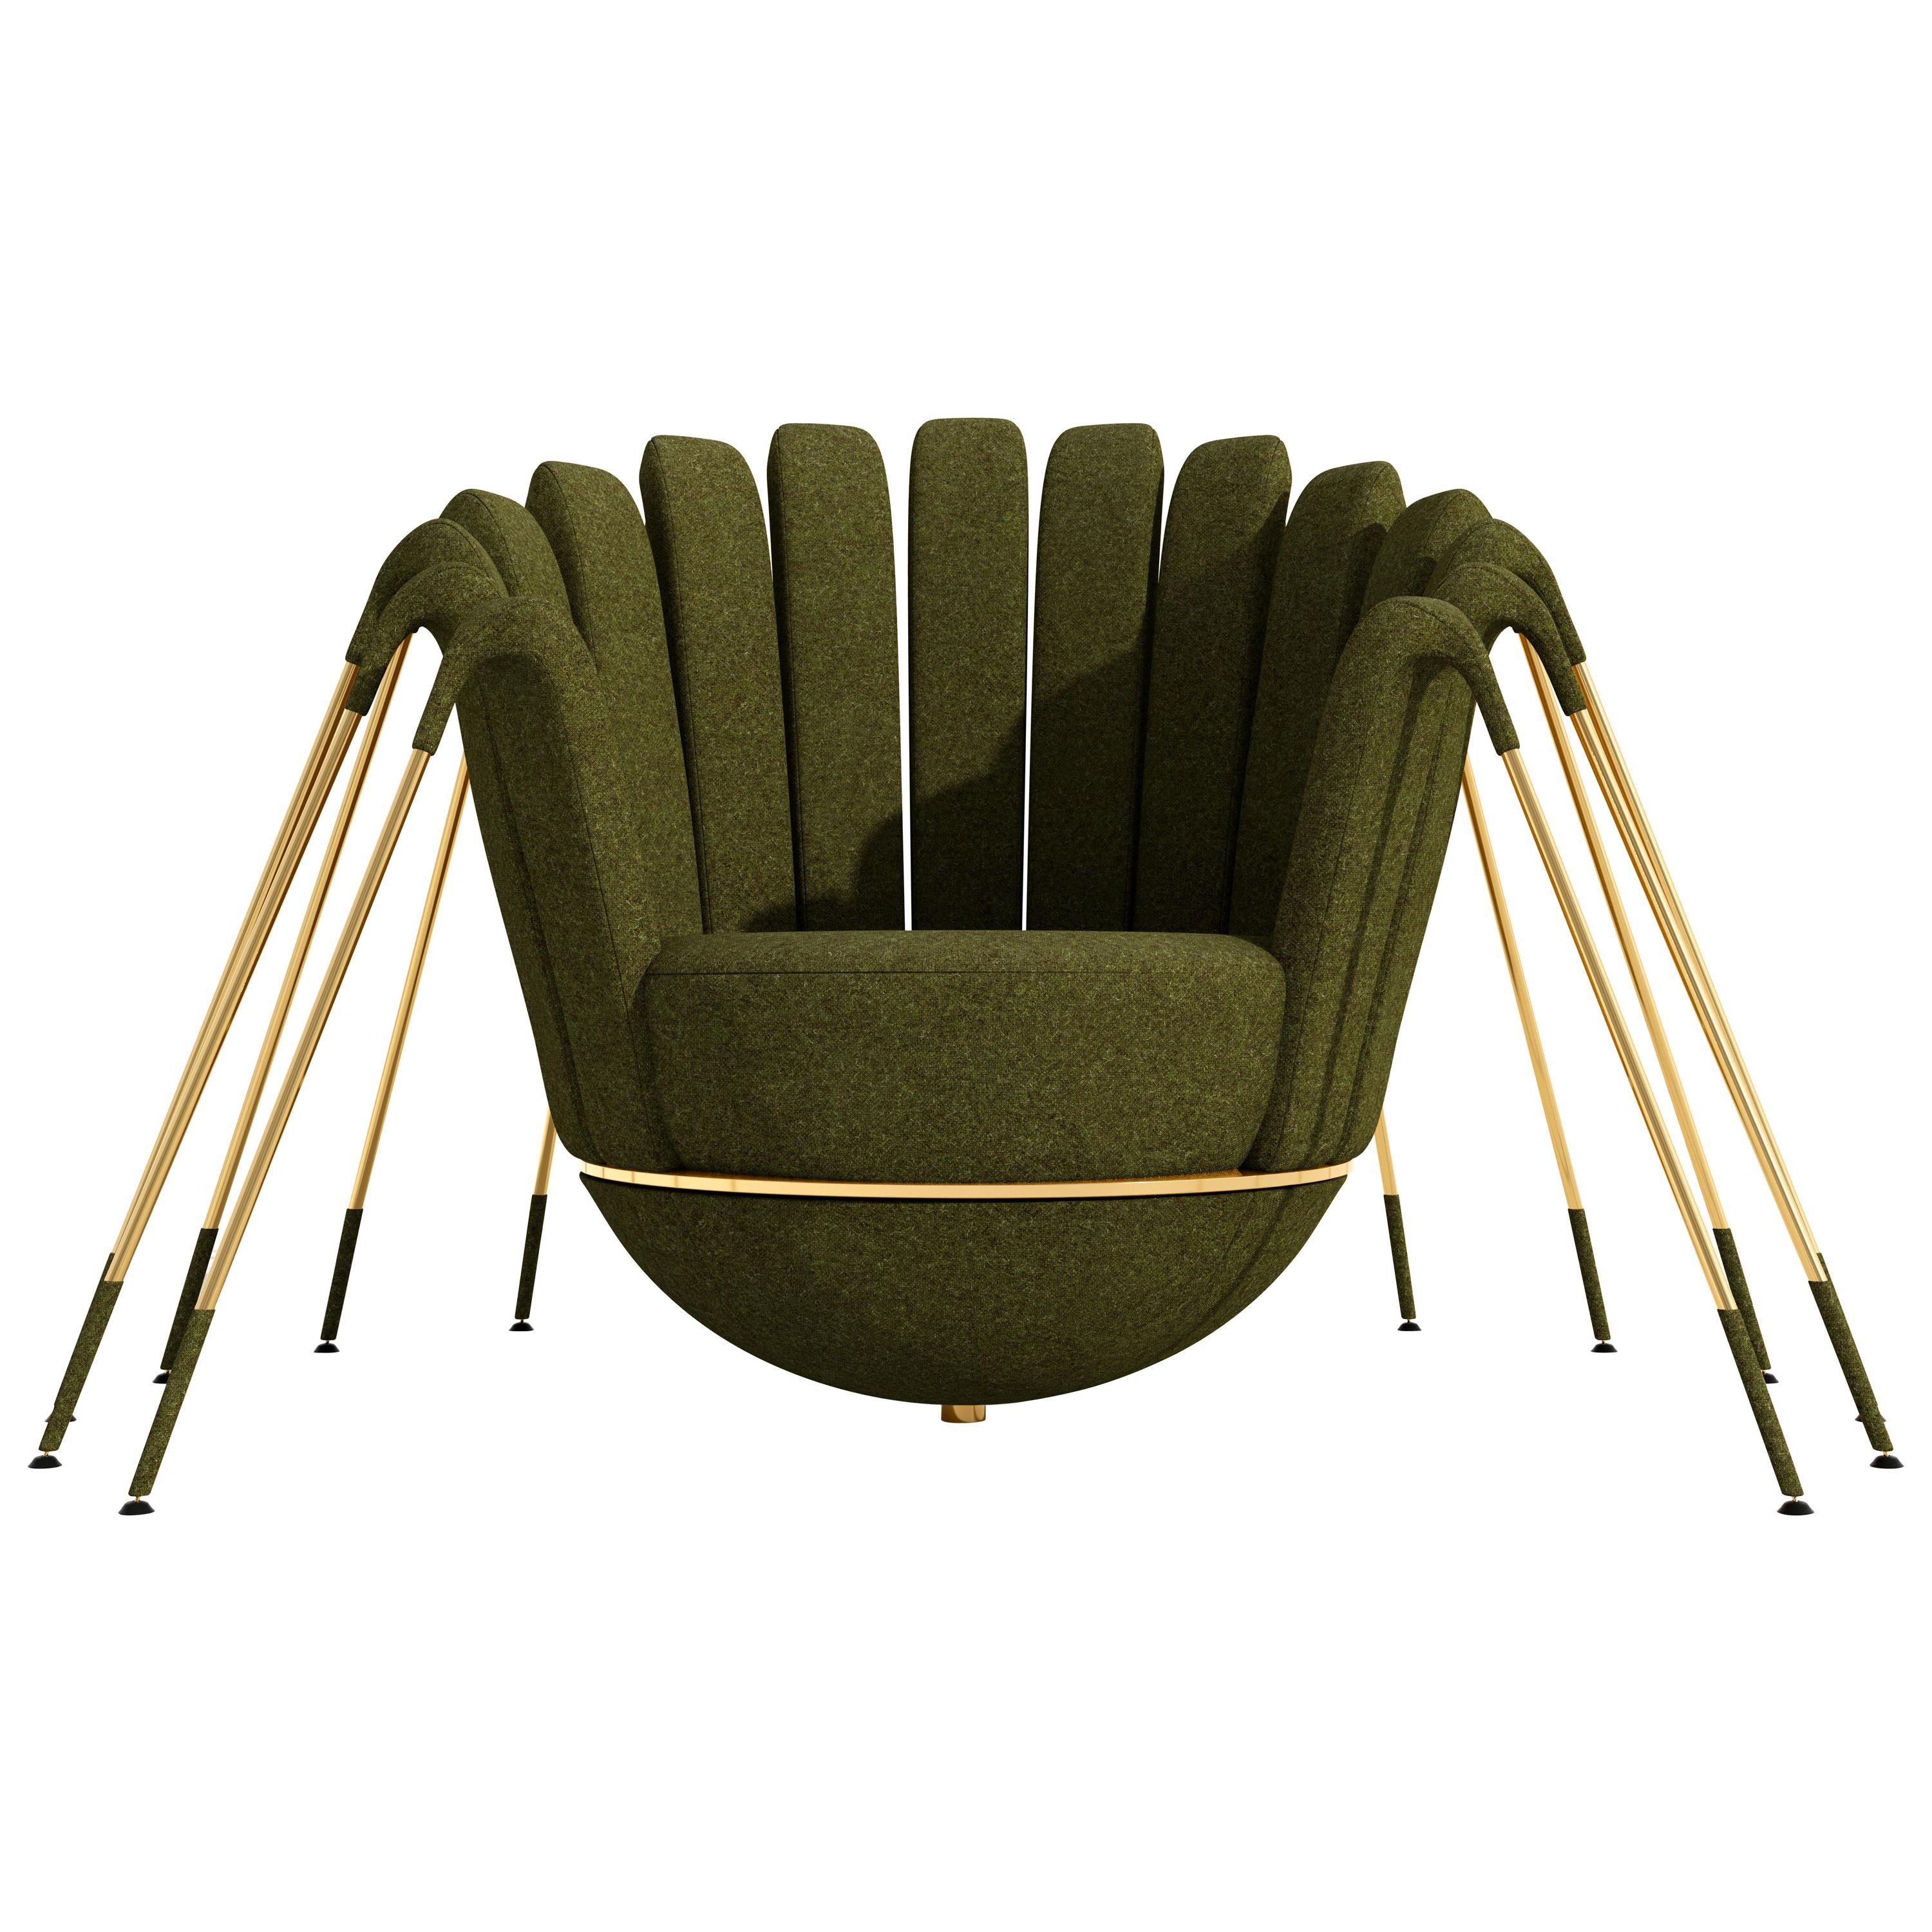 Les Araignée Armchair by Marc Ange with Golden Legs and Green Velvet Upholstery For Sale